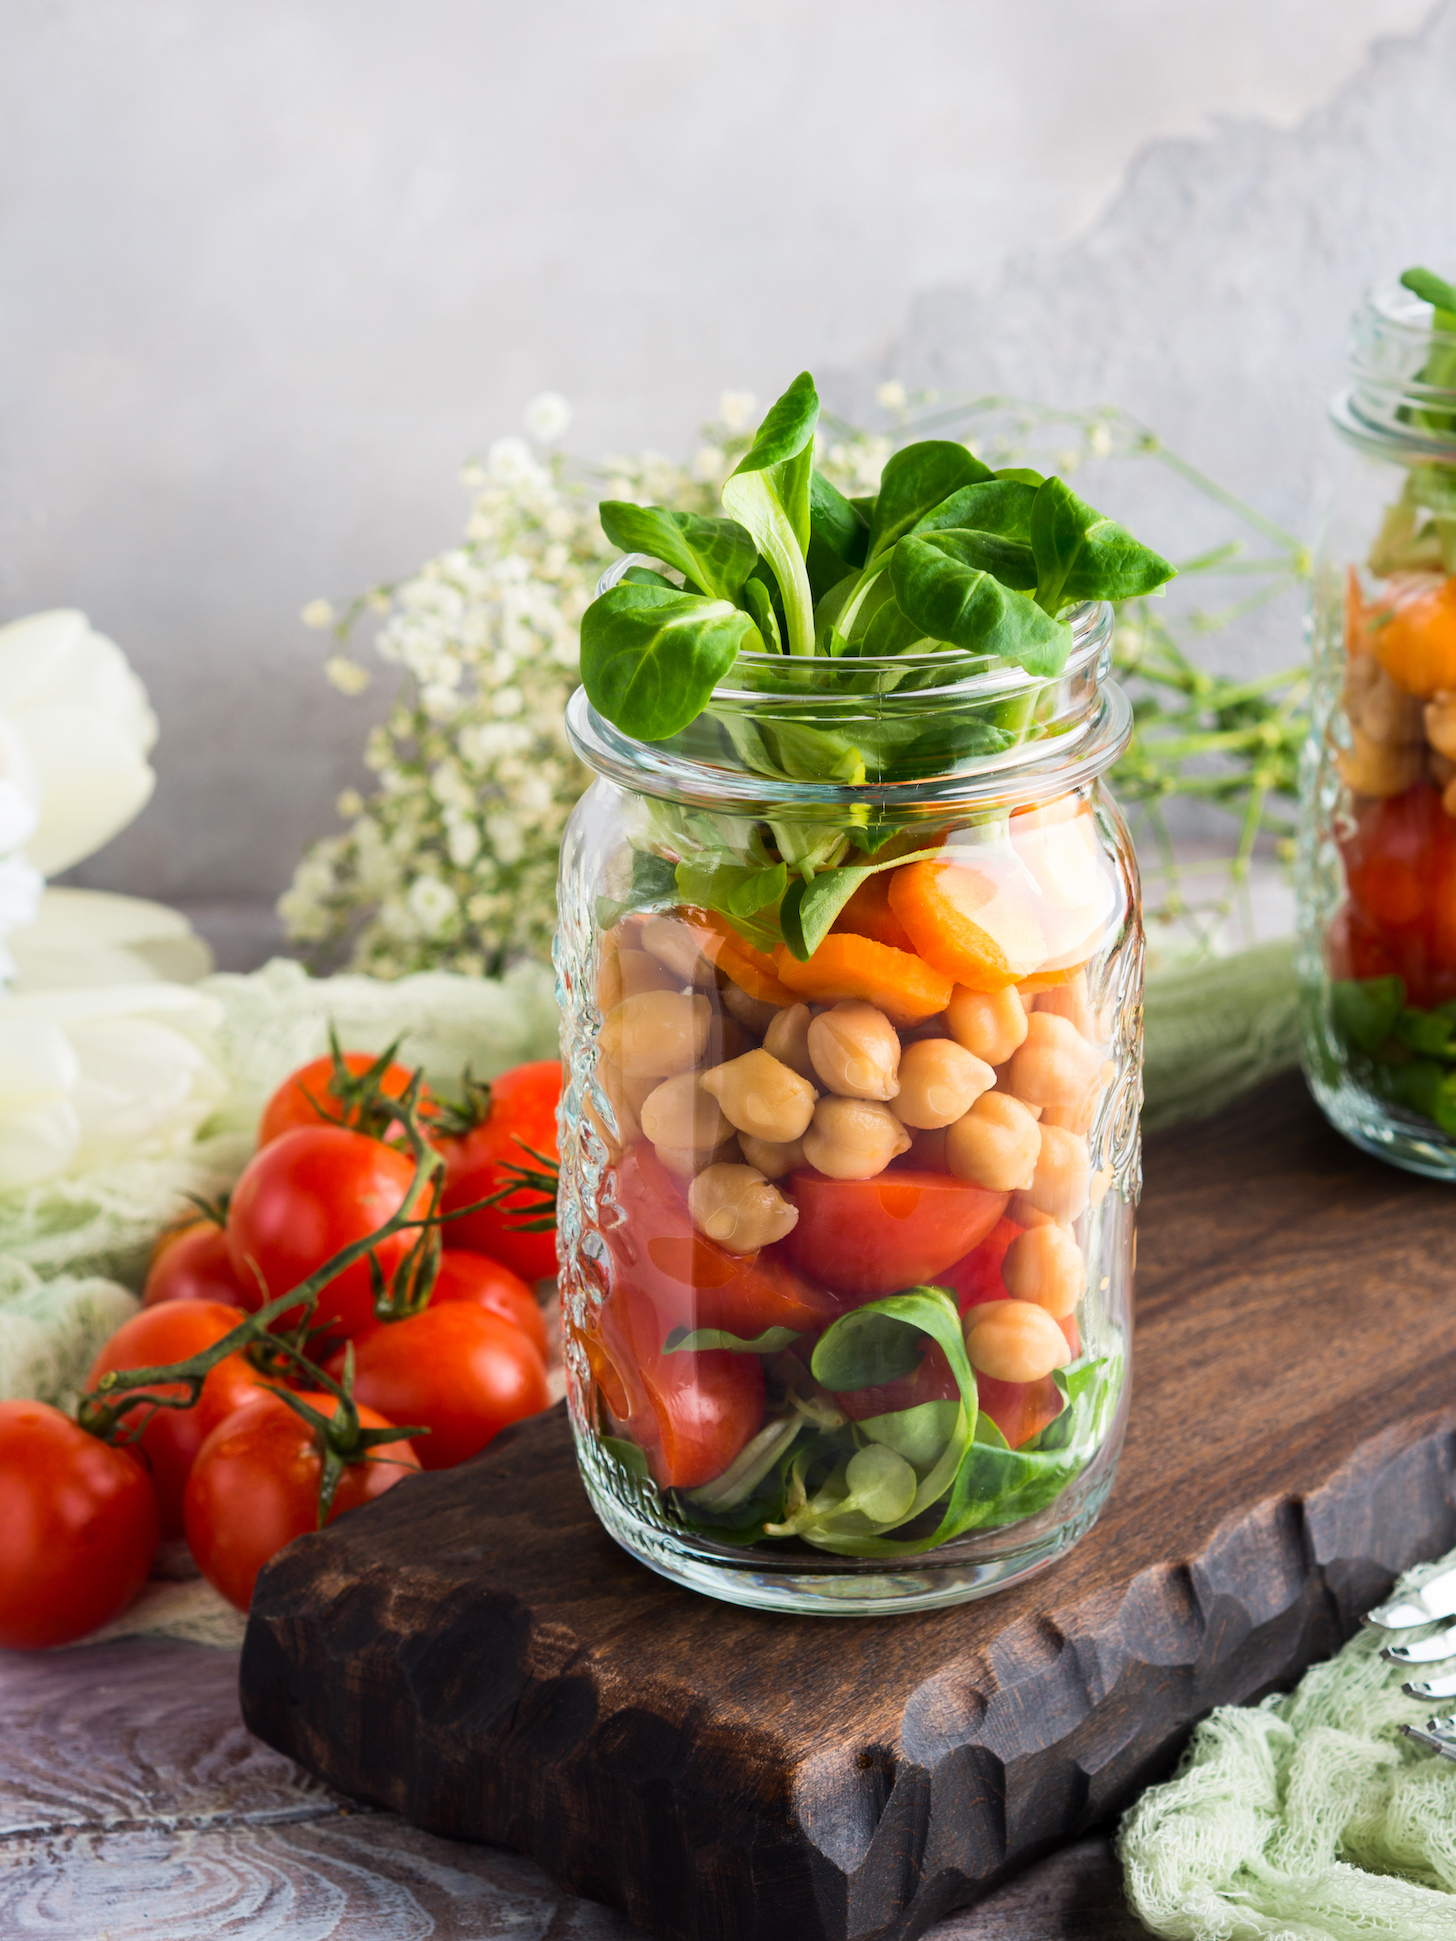 Fresh salad lunch with chickpeas, tomatoes, carrots and valerian served in mason jars.